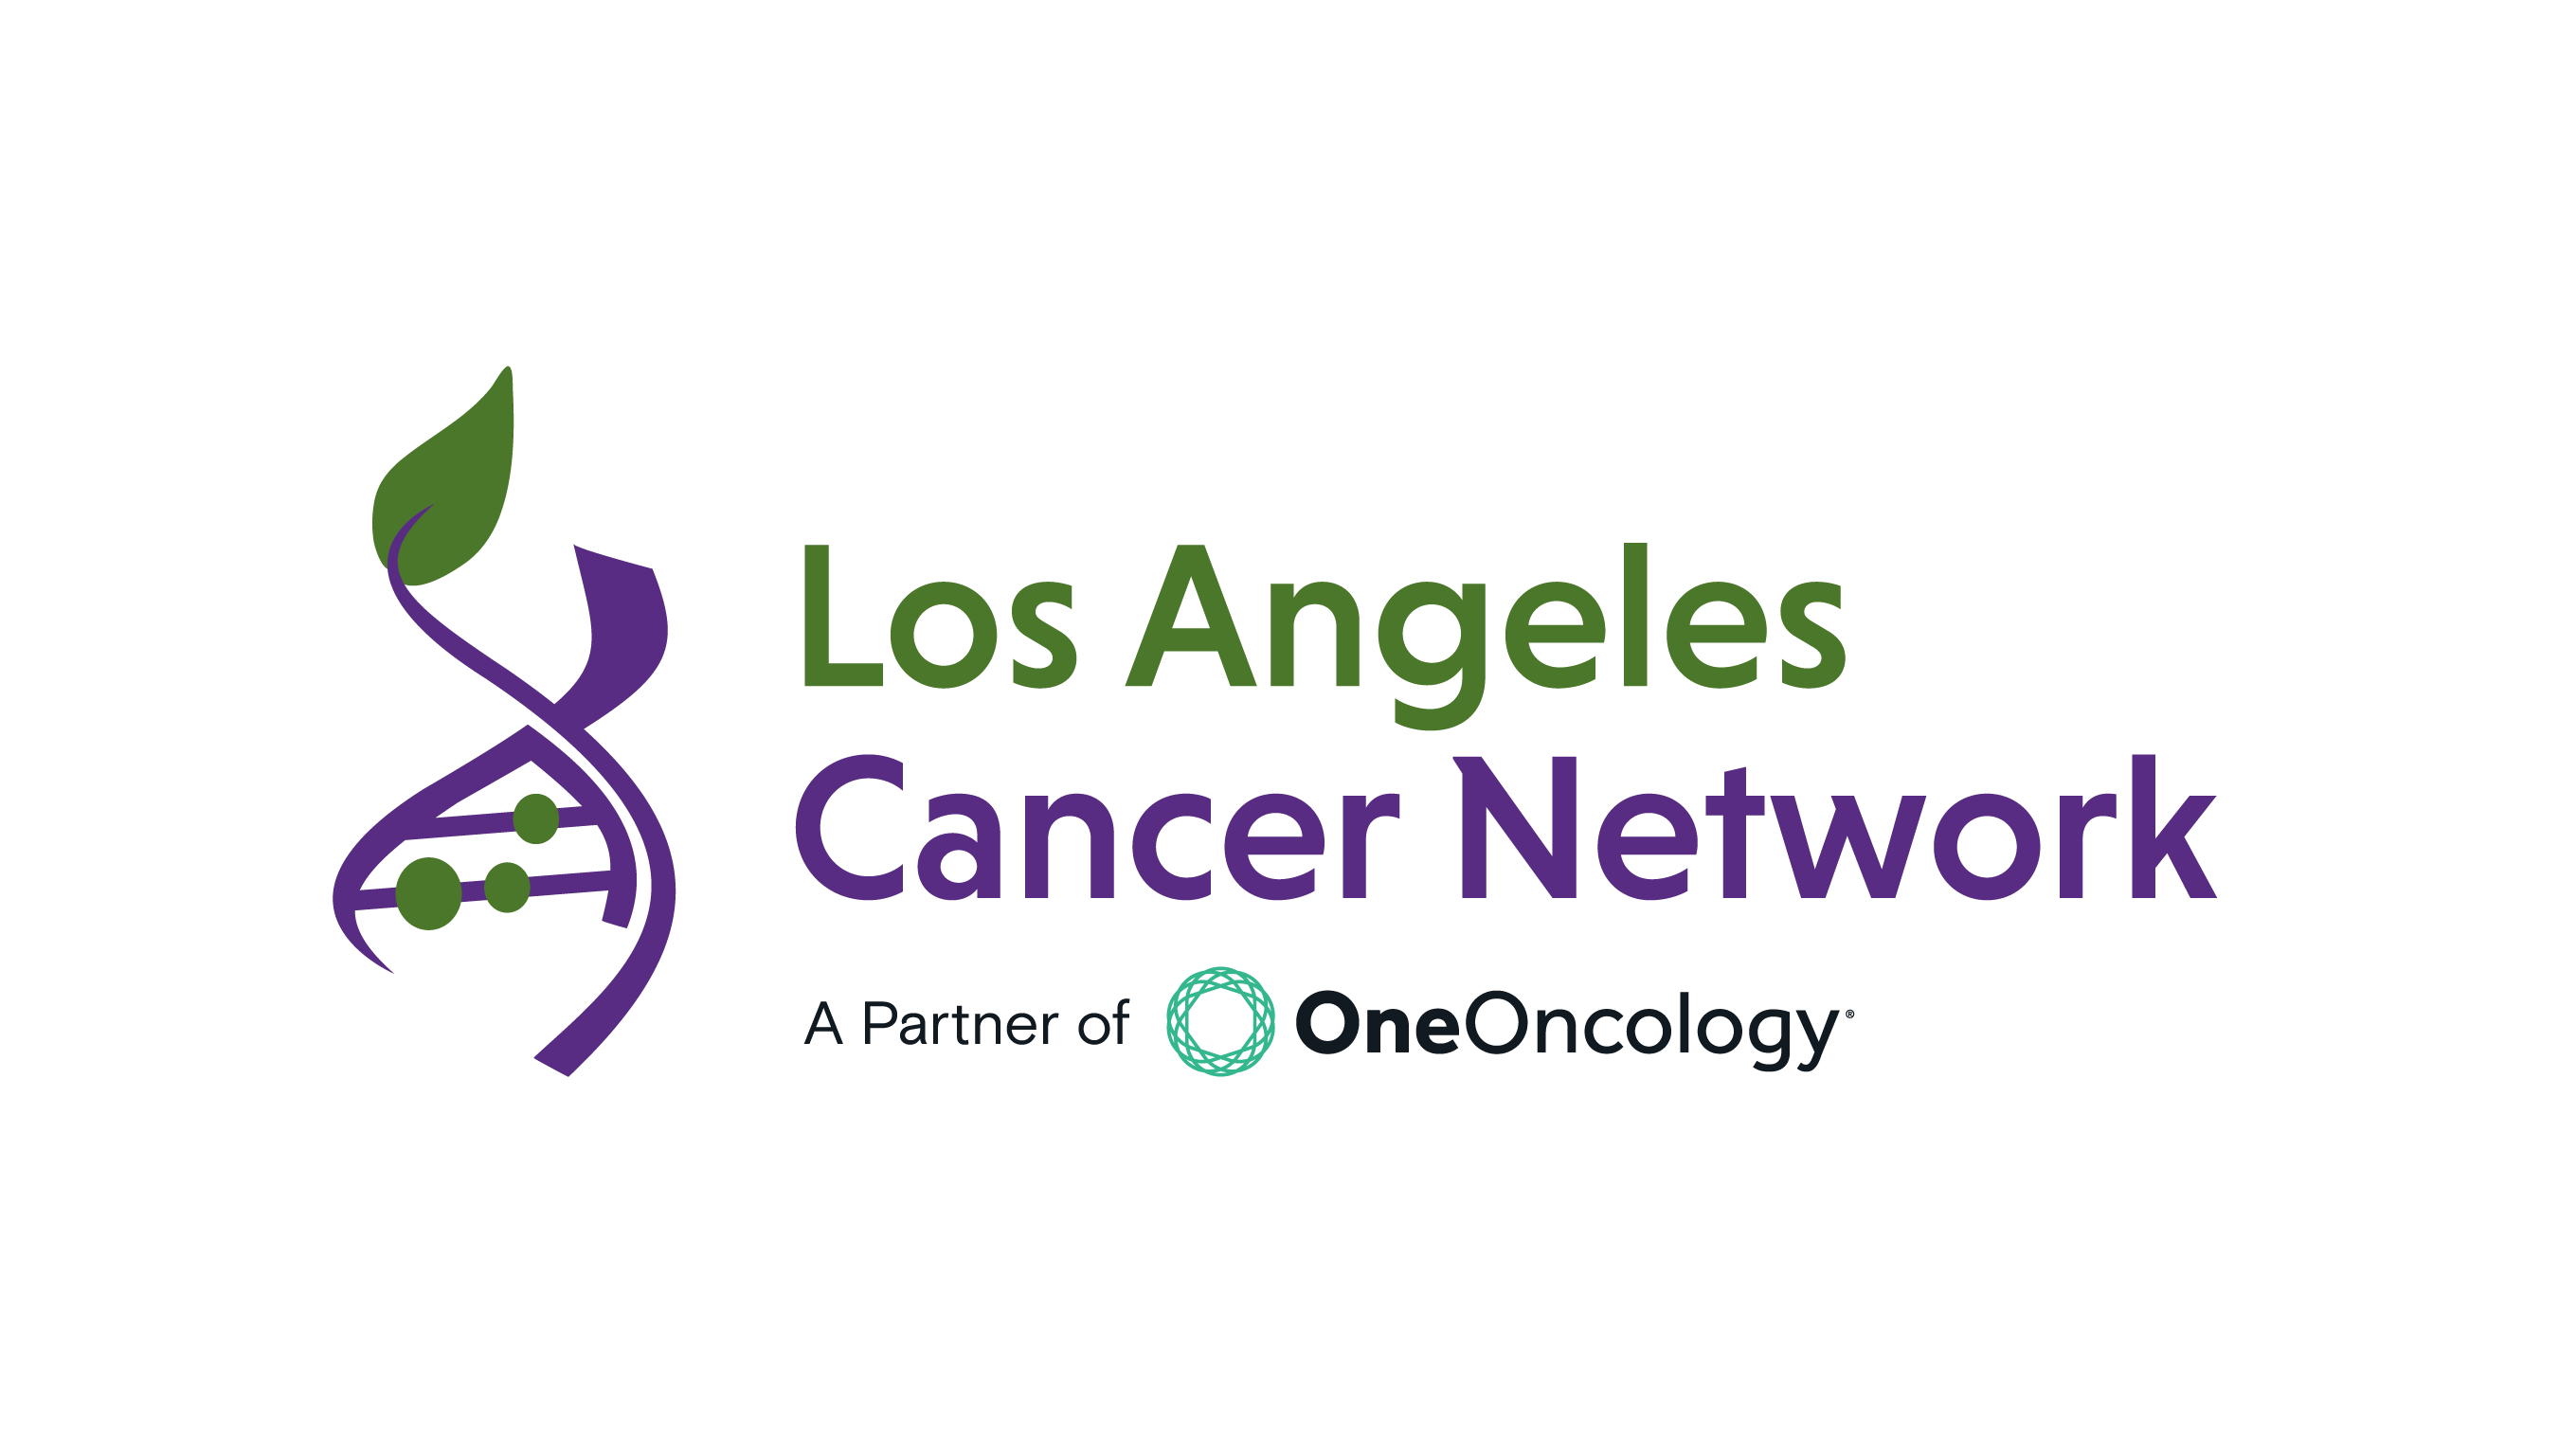 Los Angeles Cancer Network